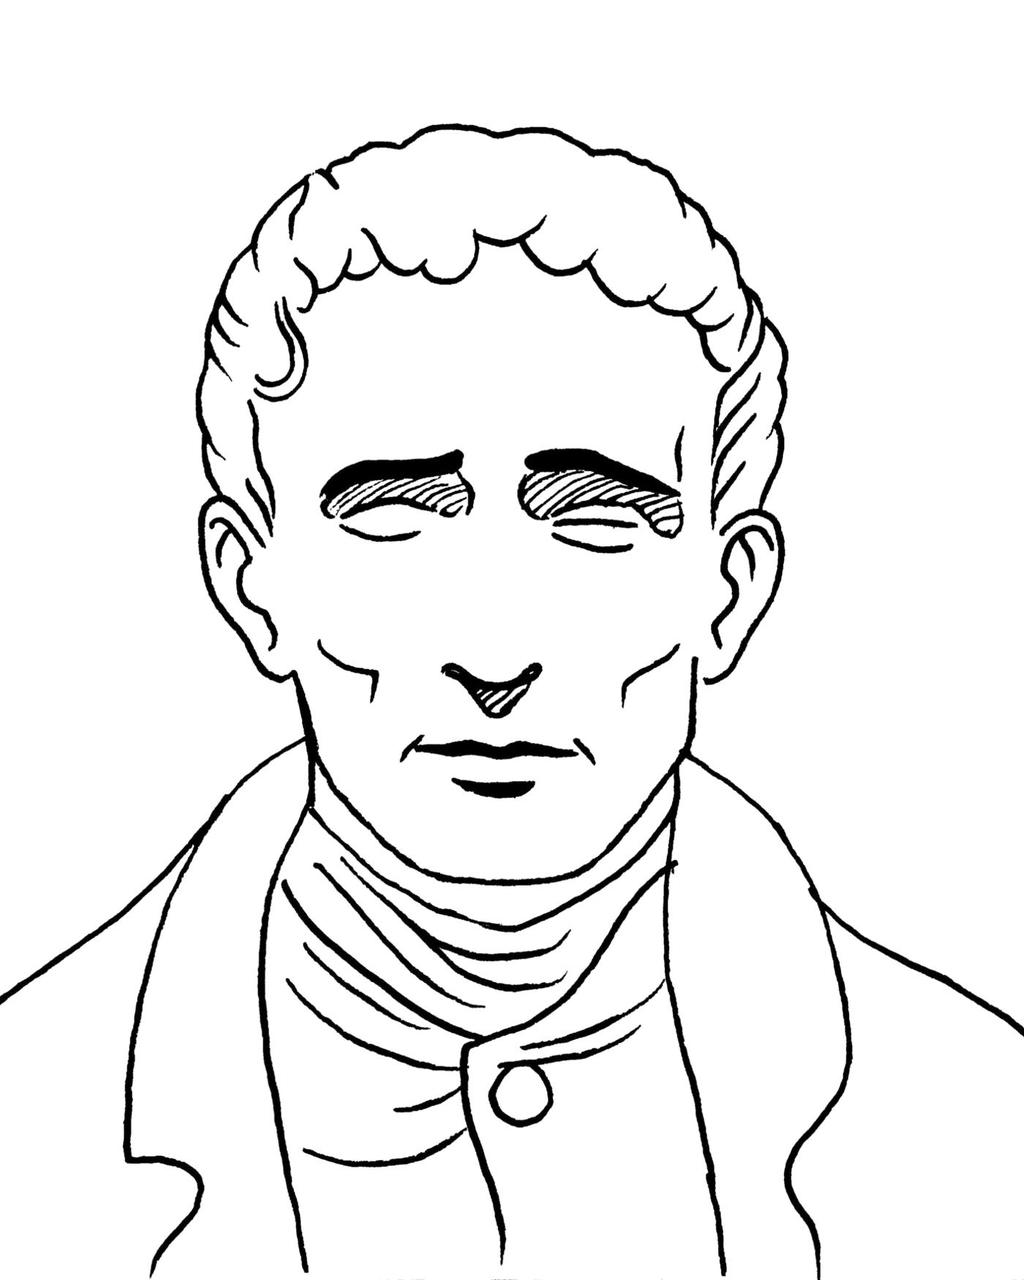 Learn To Draw Louis Braille